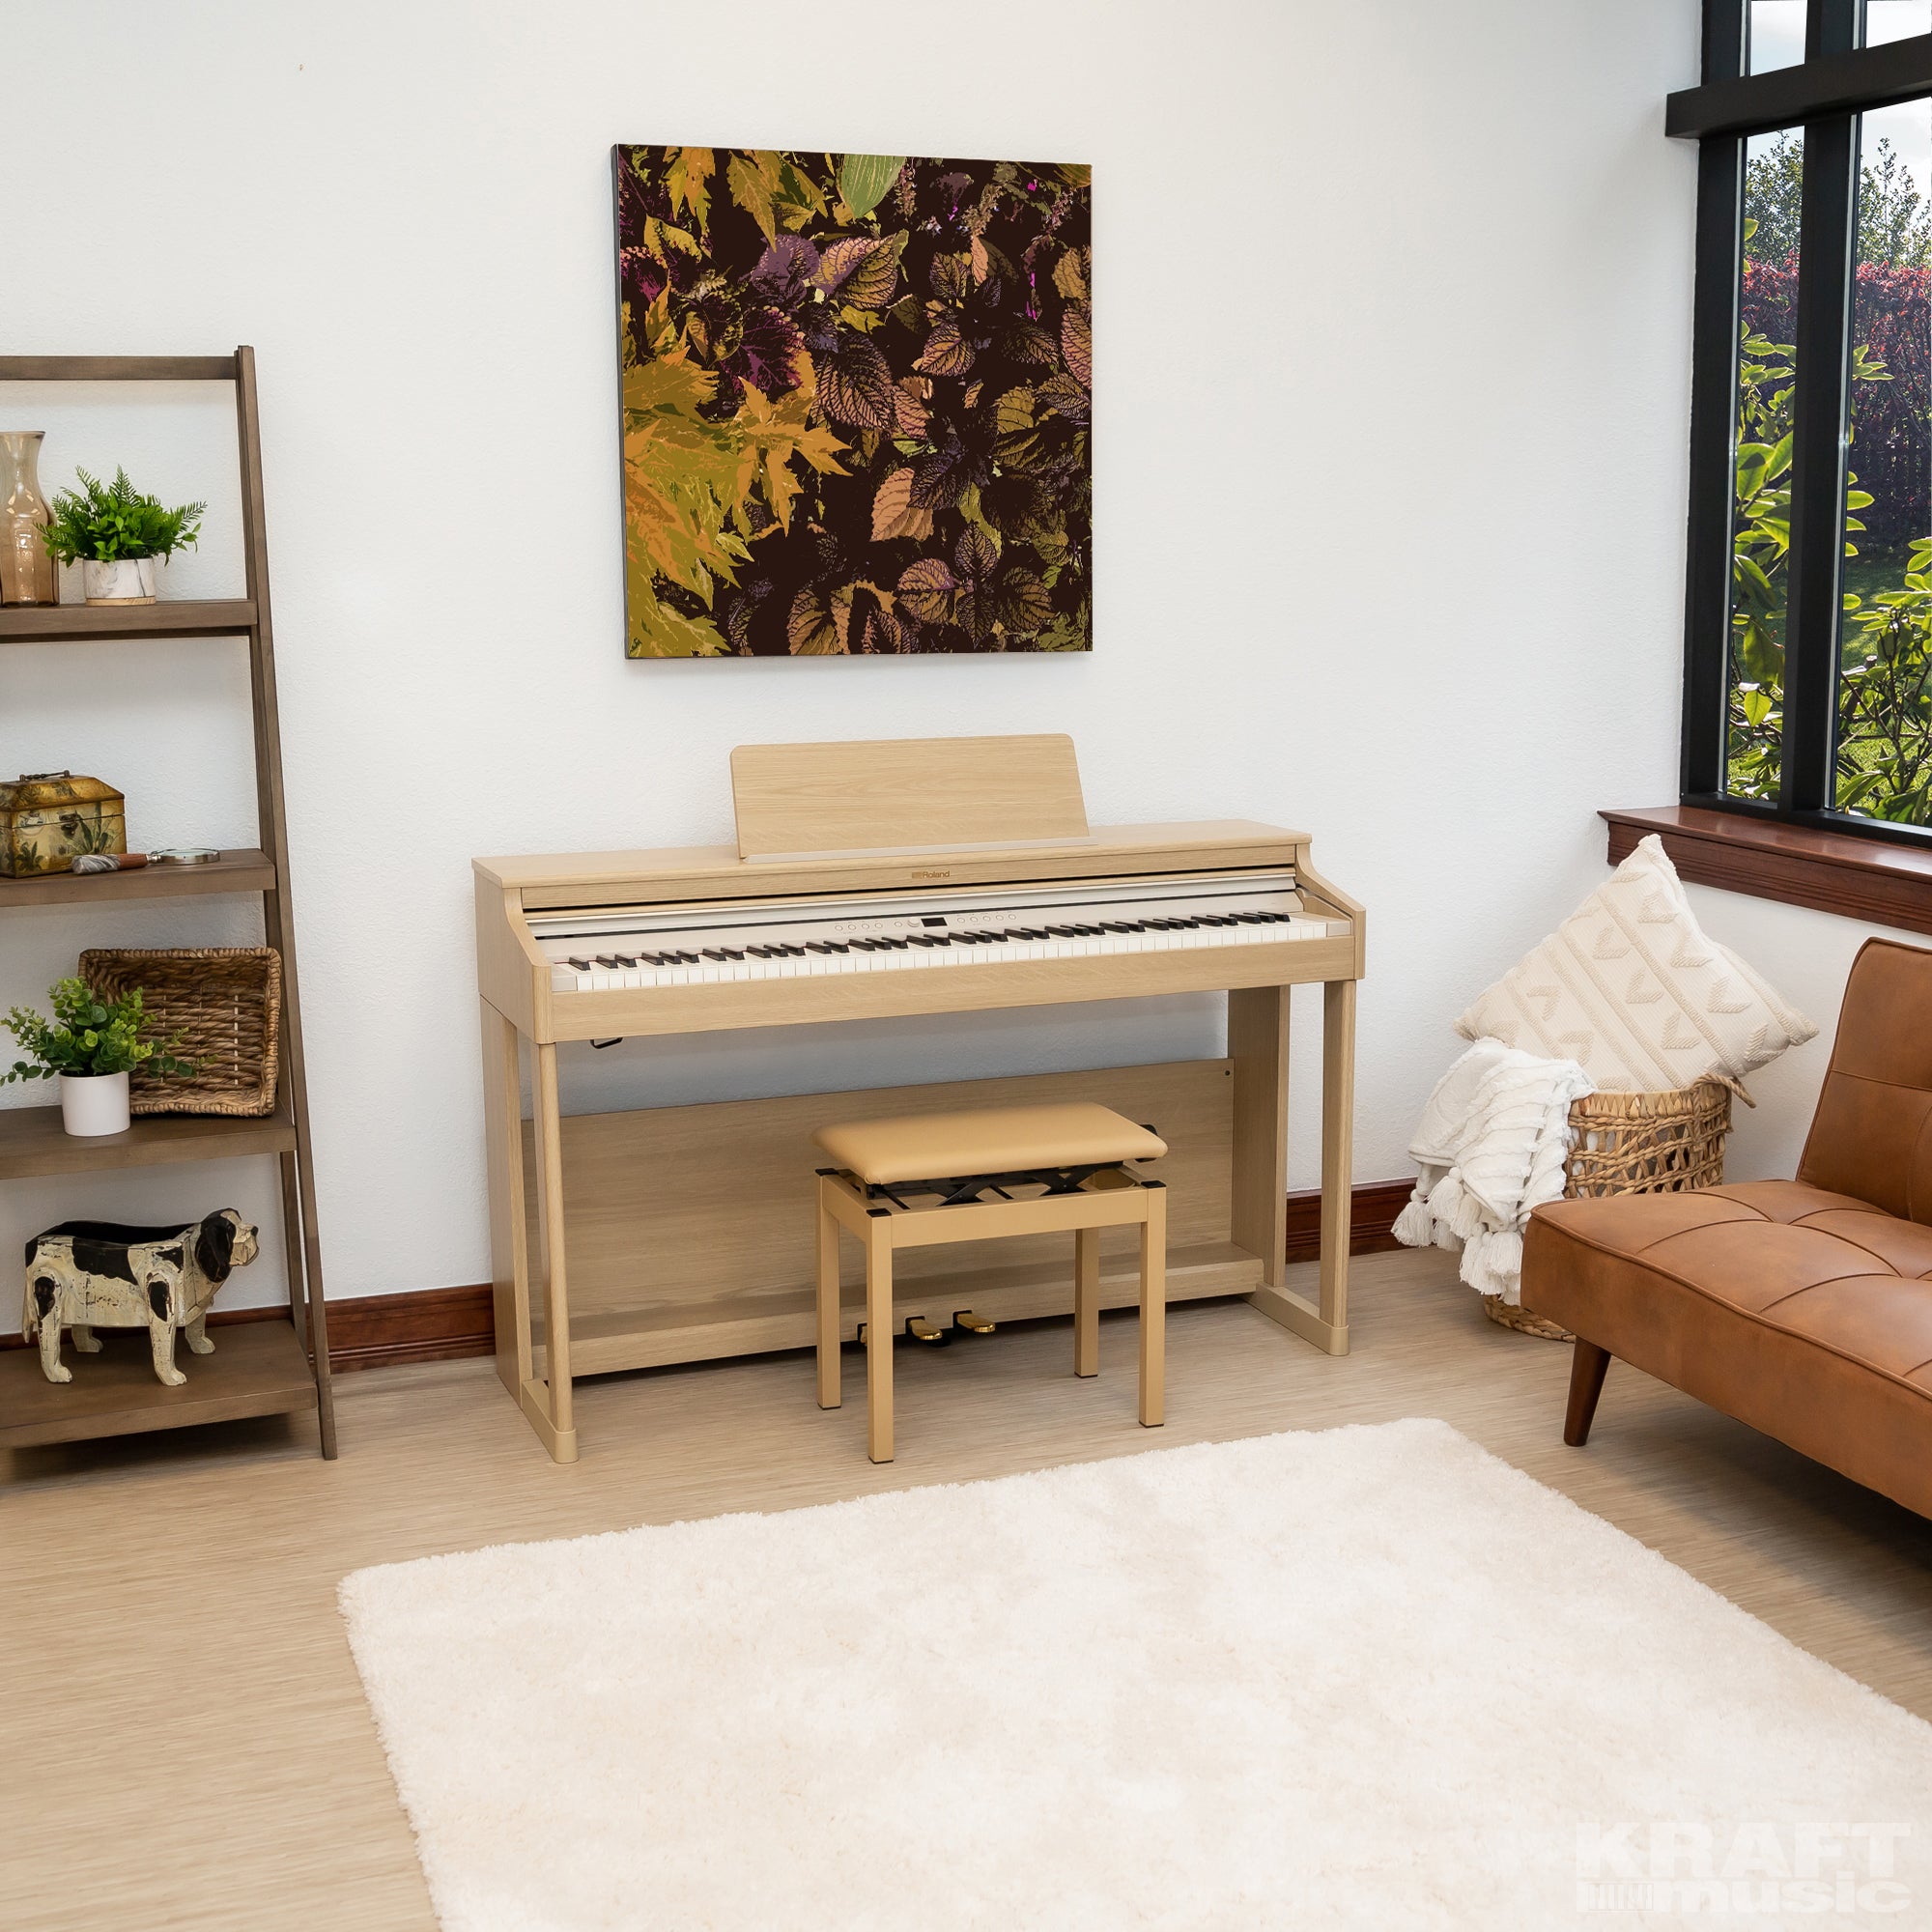 Roland RP701 Digital Piano - Light Oak - in a stylish living space